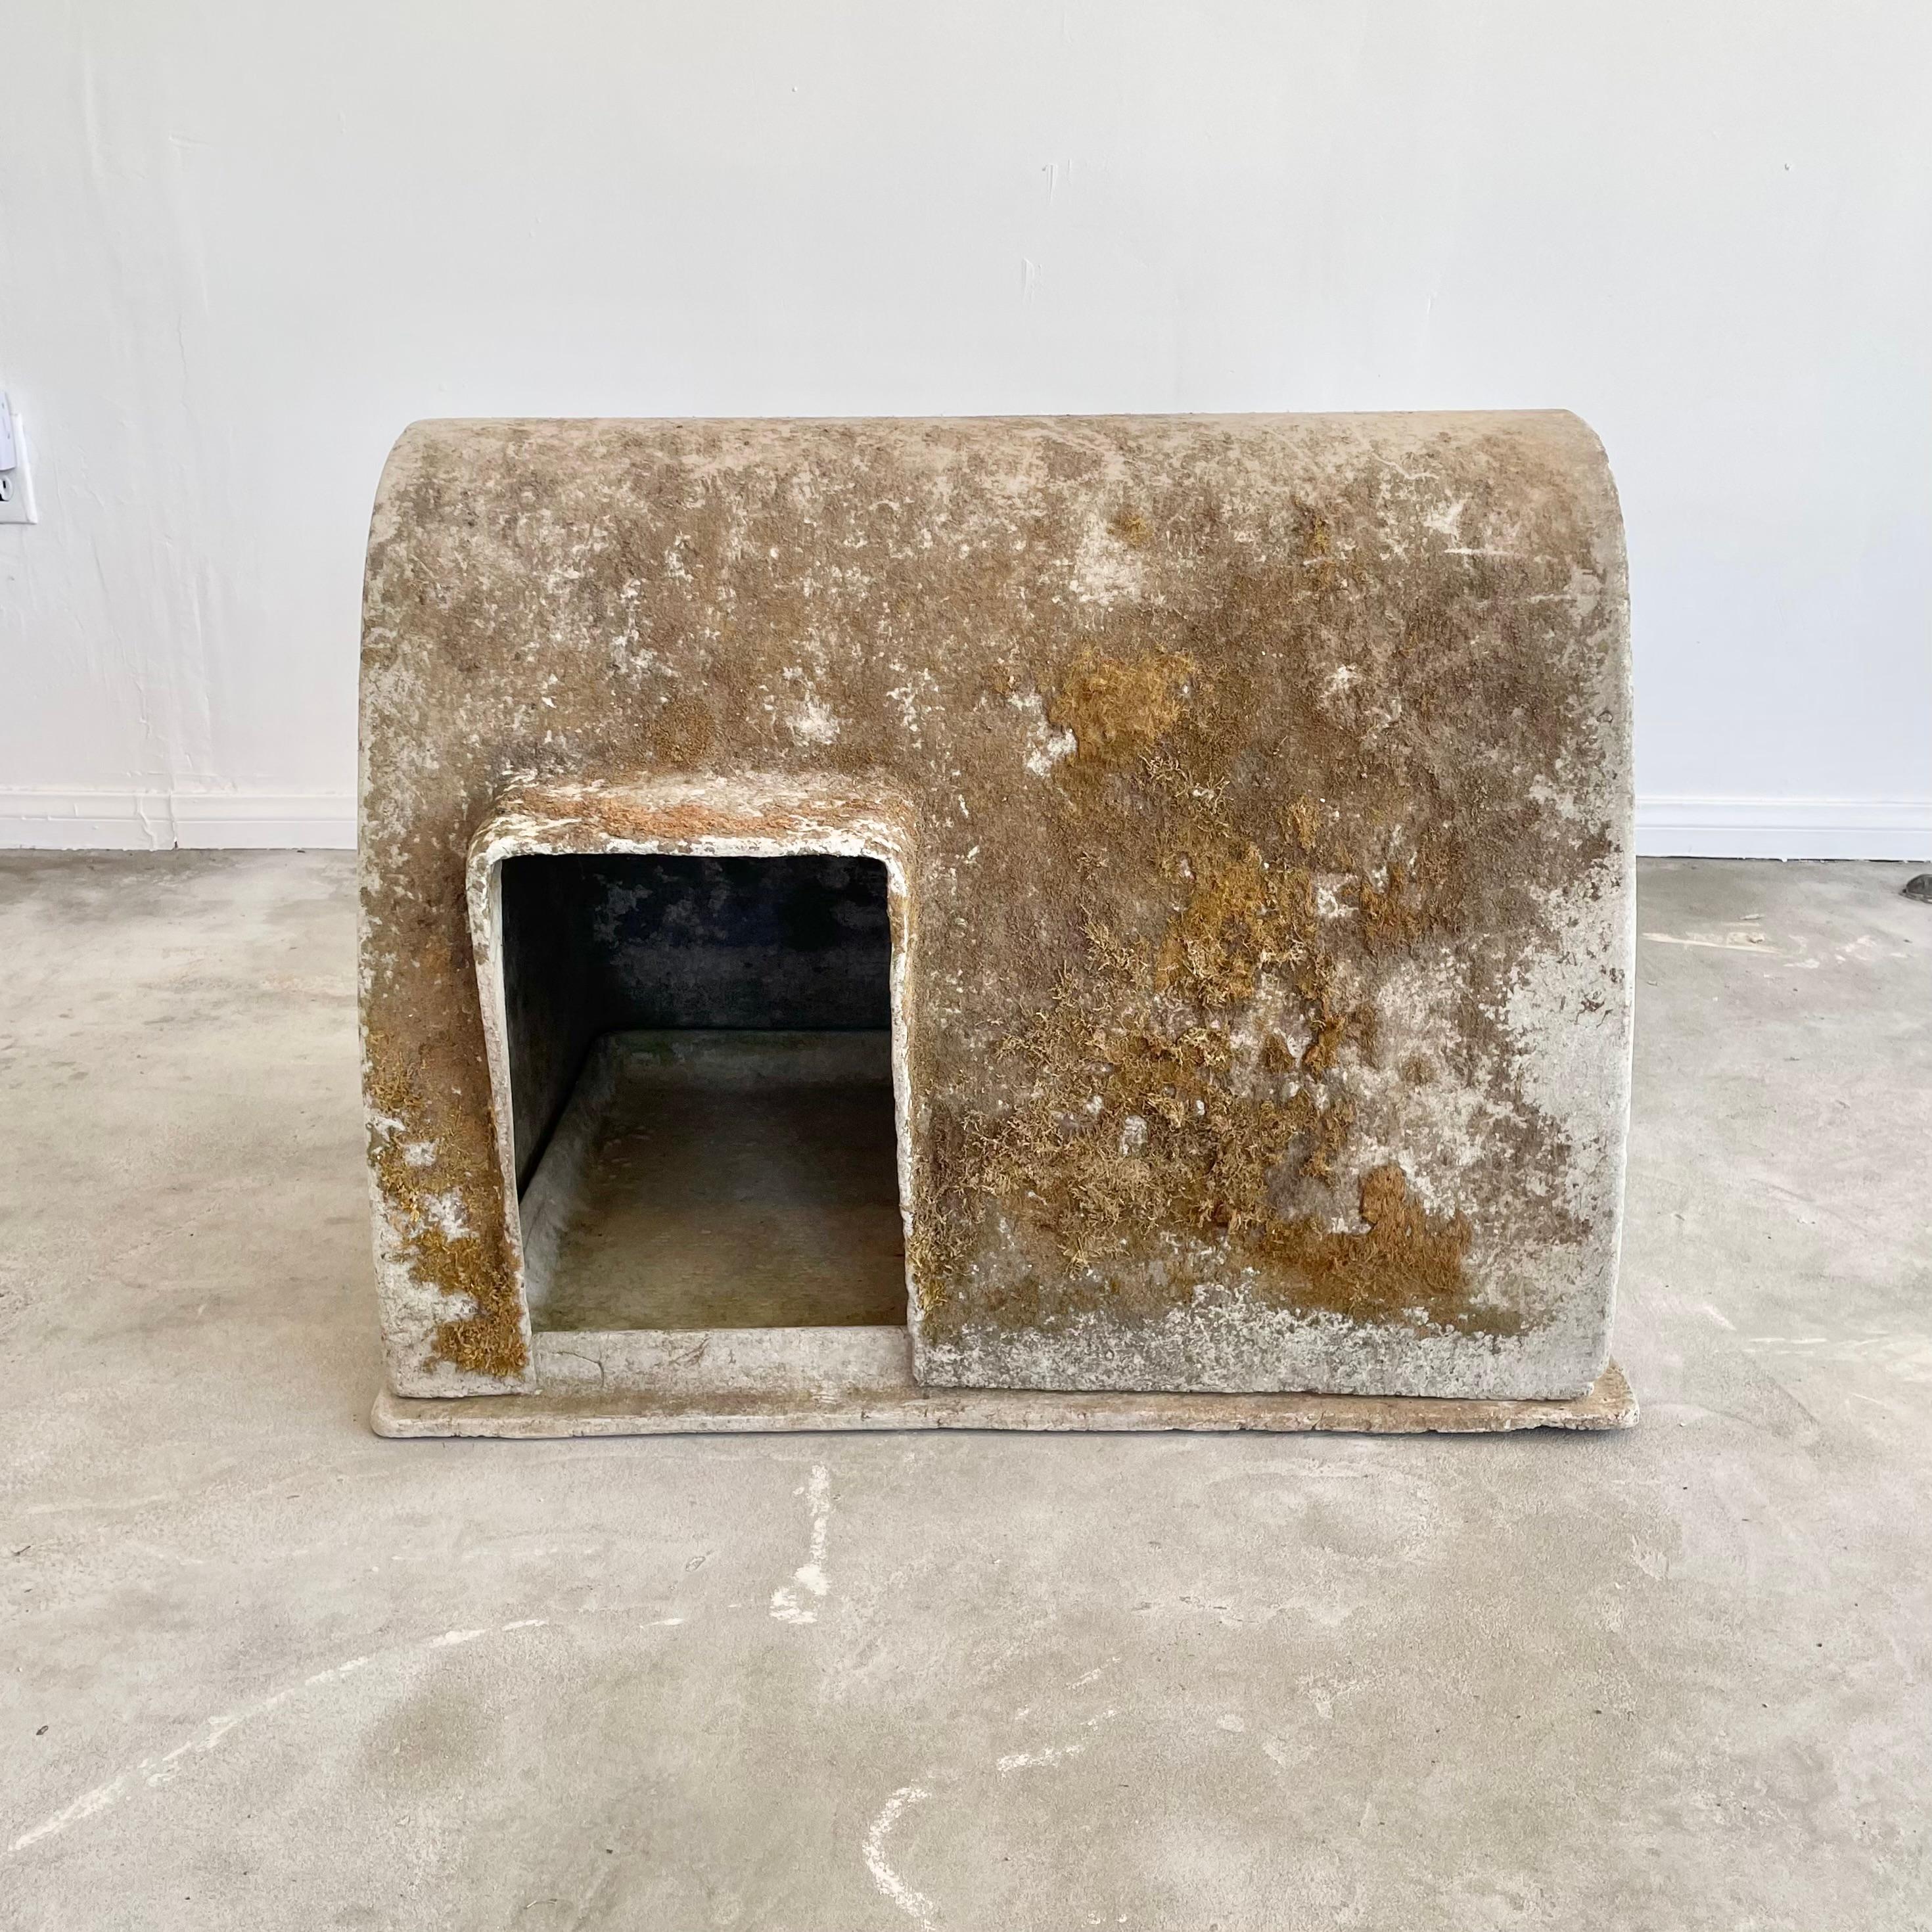 Amazing industrial cement dog kennel by Swiss designer Willy Guhl for Eternit. Extremely rare size with heavy patina and lichen. A small doggy door is on the bottom left side of the structure which measures 9.75